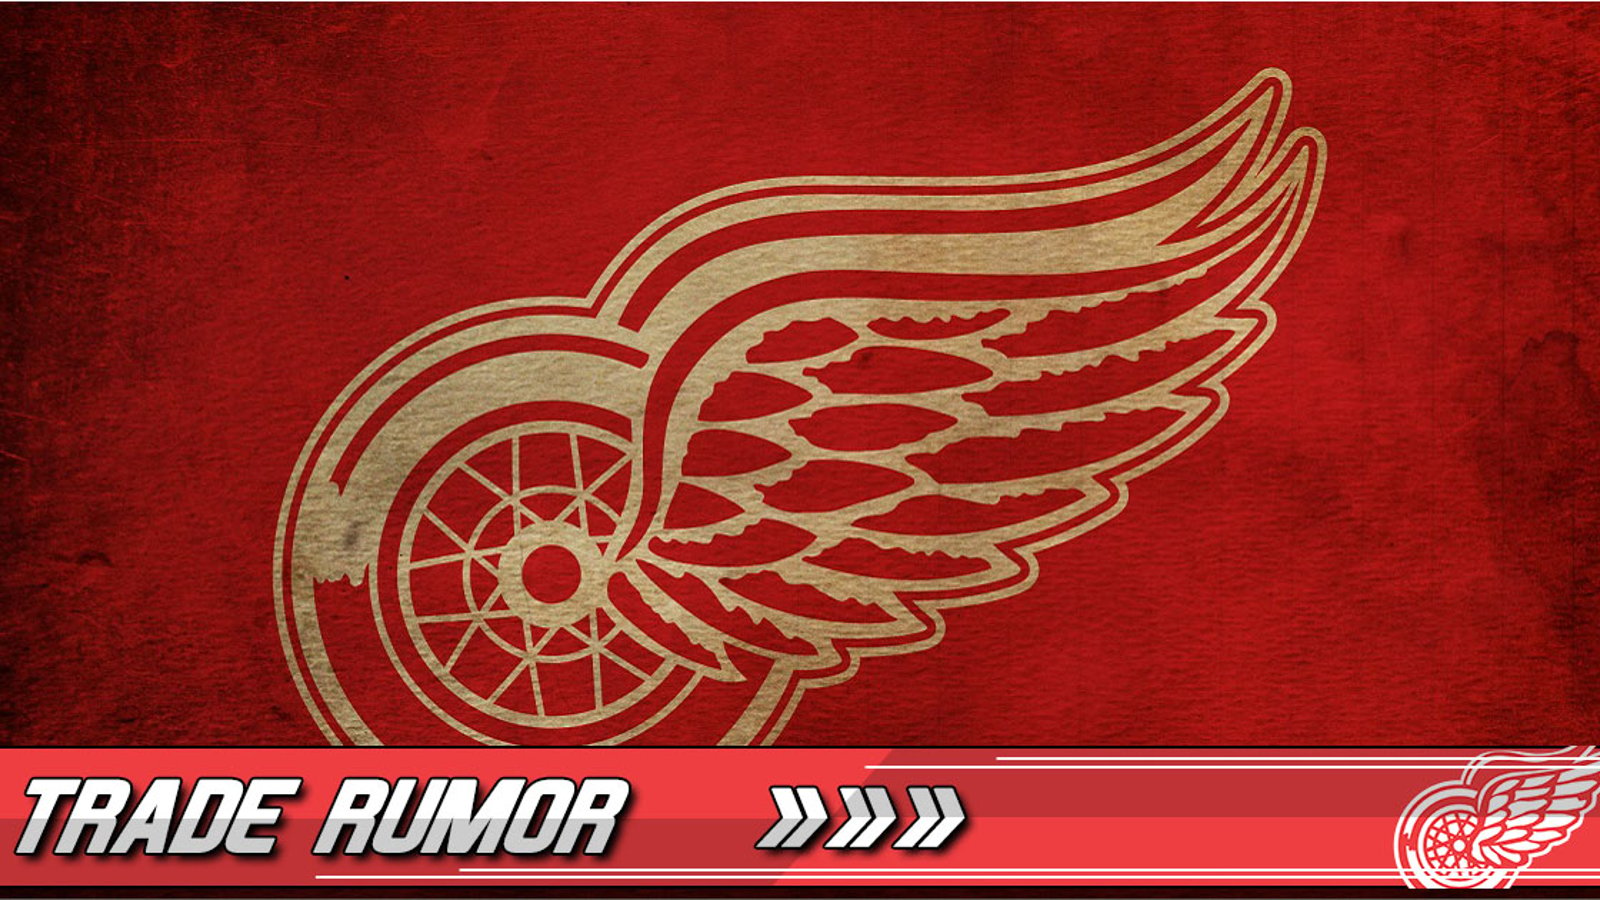 Red Wings veteran will be traded if the team continues to perform poorly.